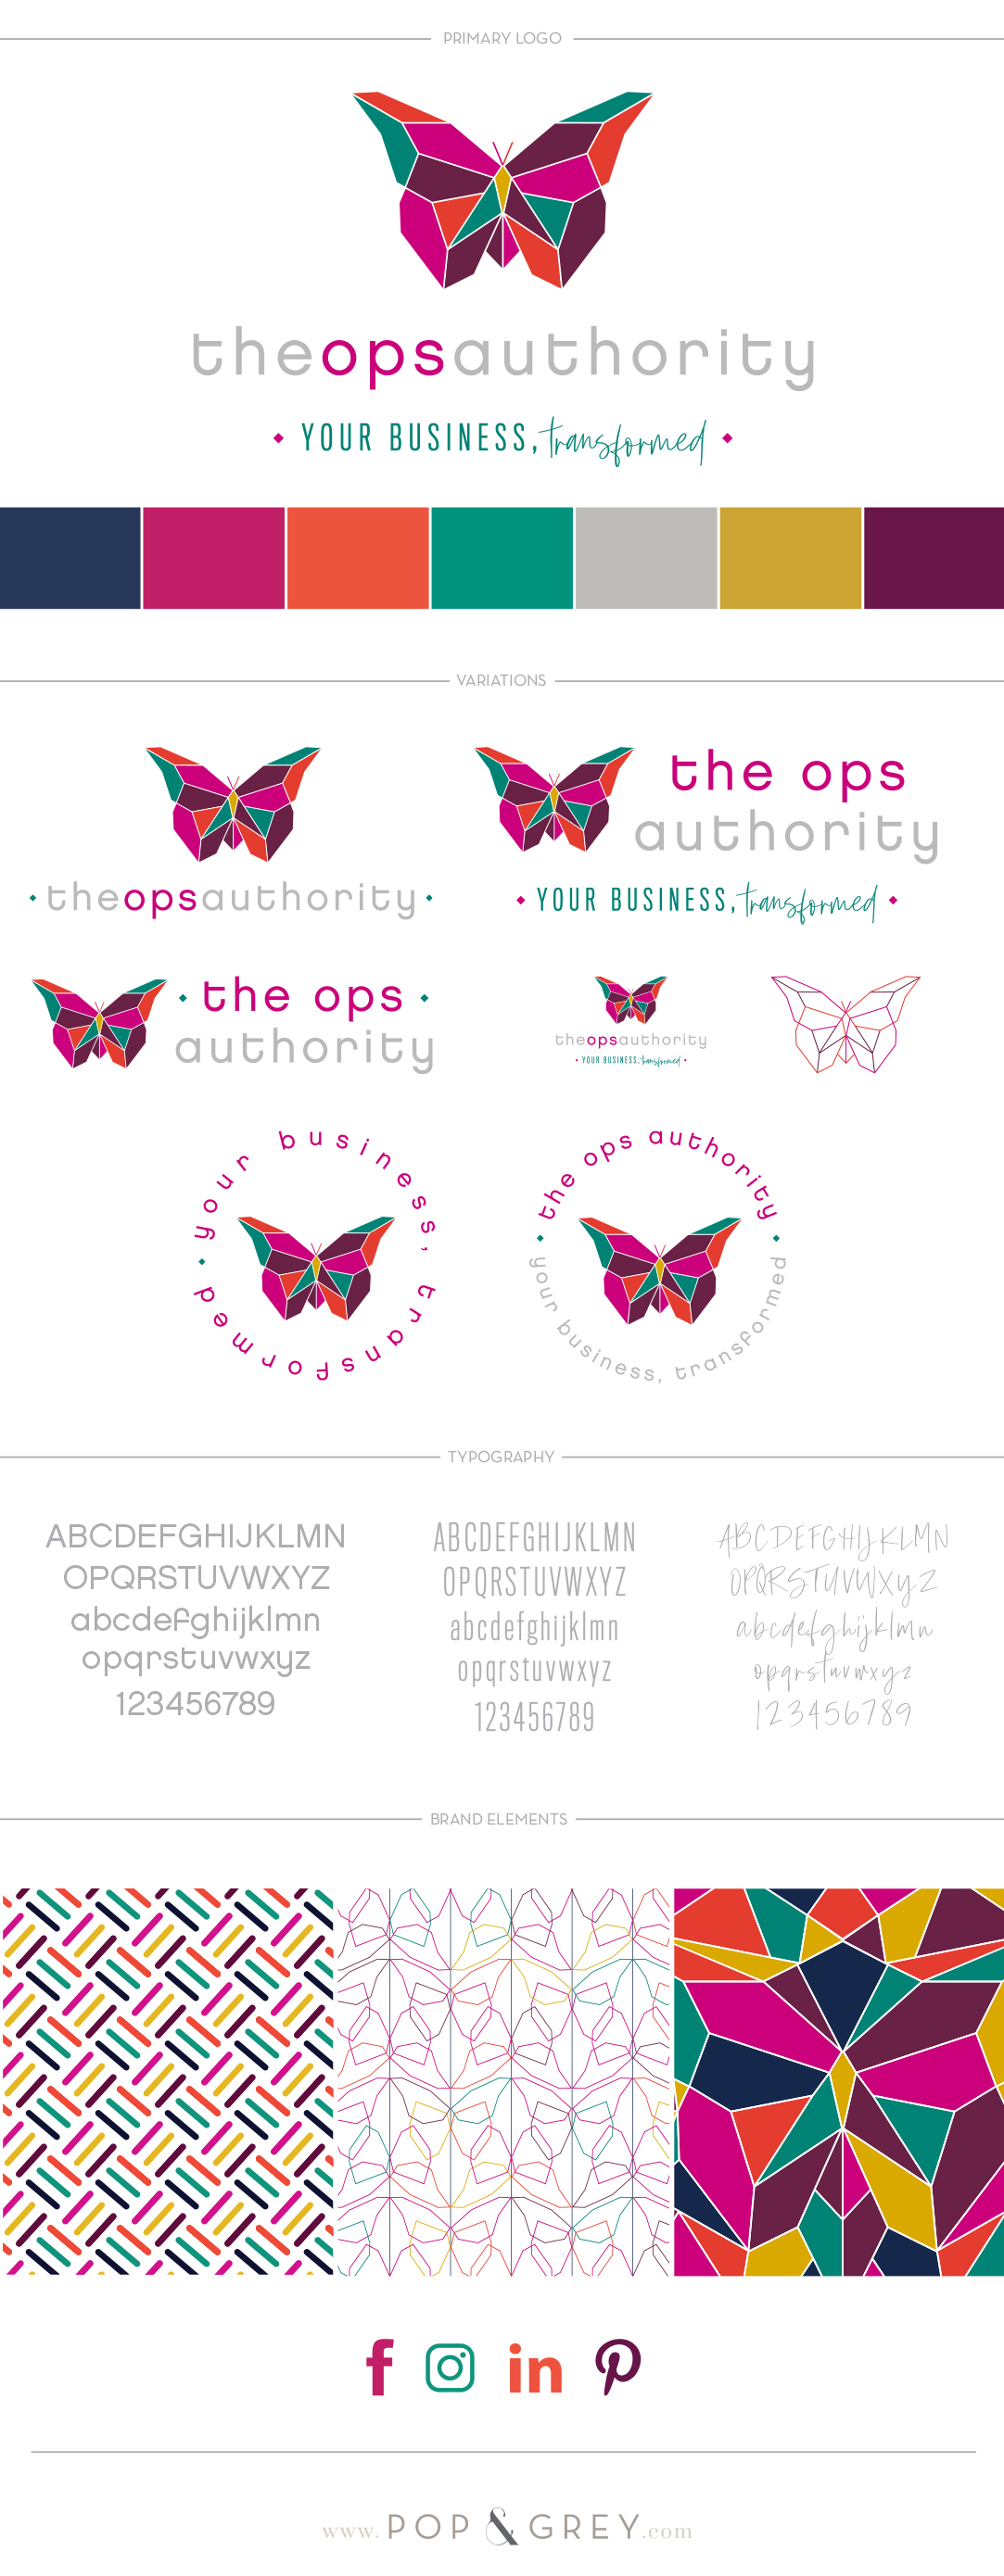 the ops authority with natalie gingrich brand design by pop and grey